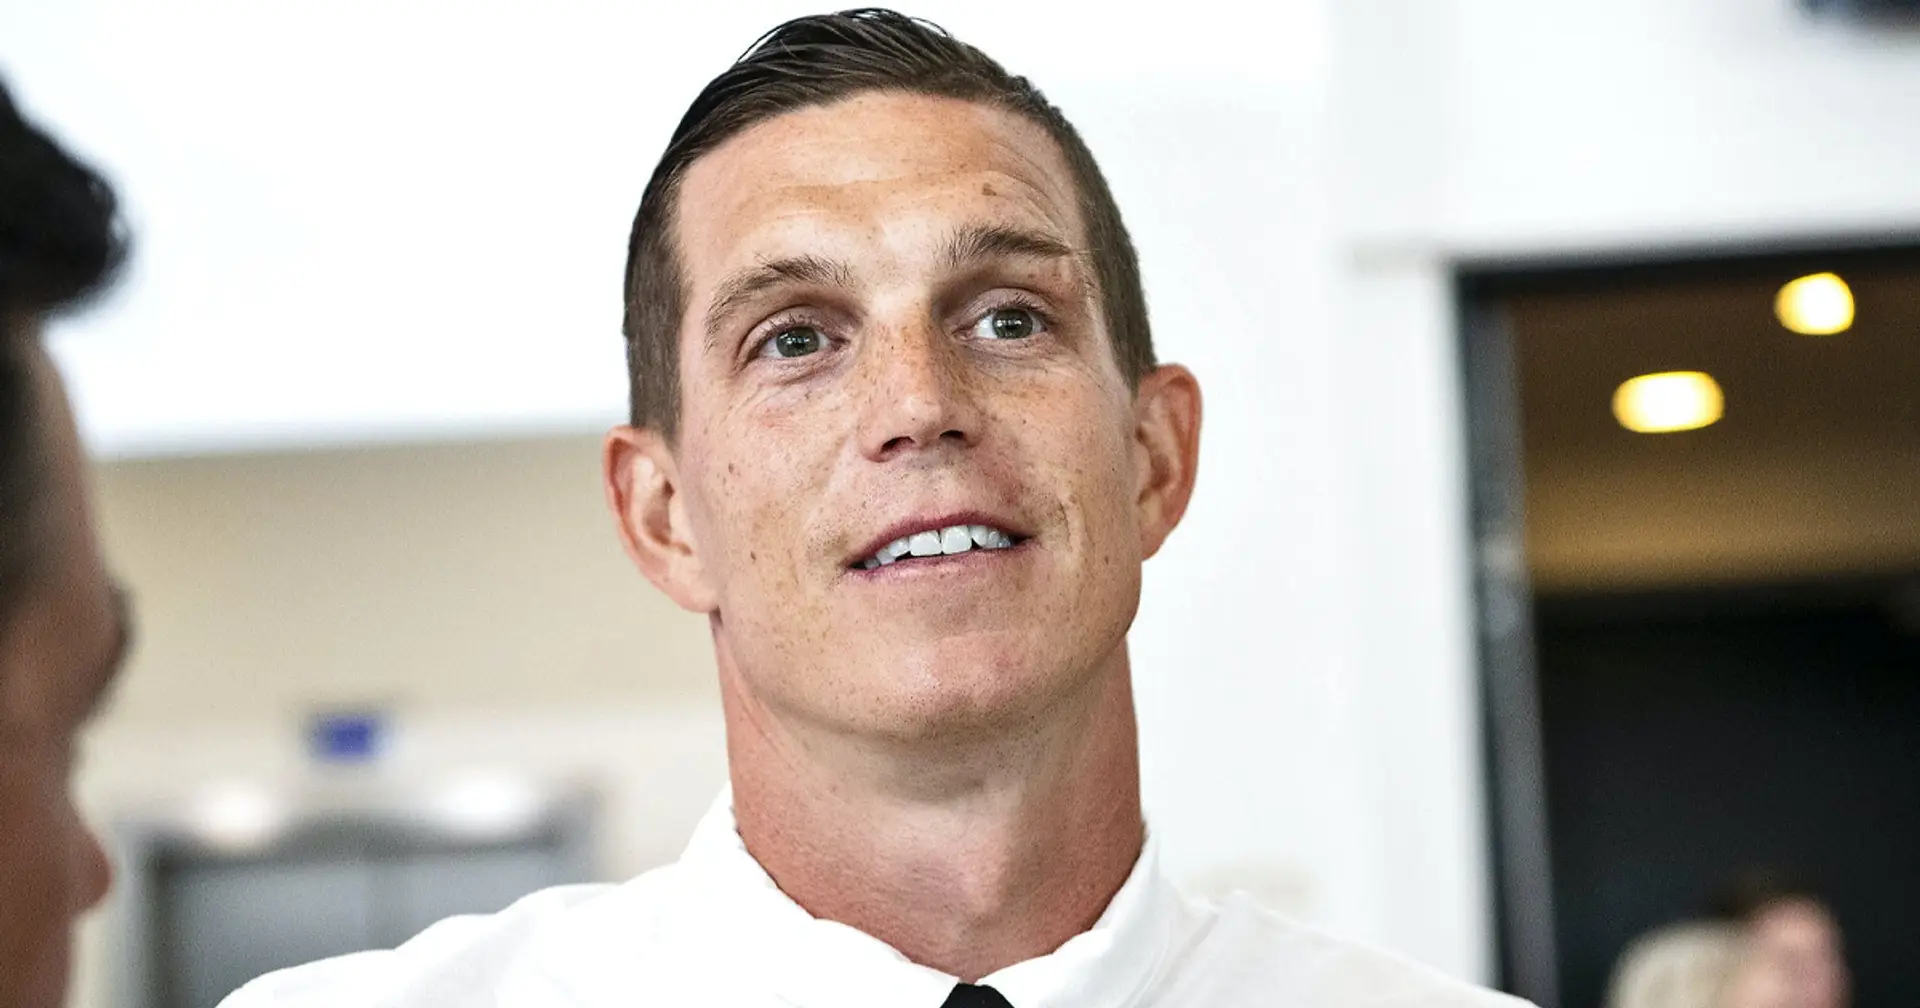 Daniel Agger lands his first managerial job in Denmark